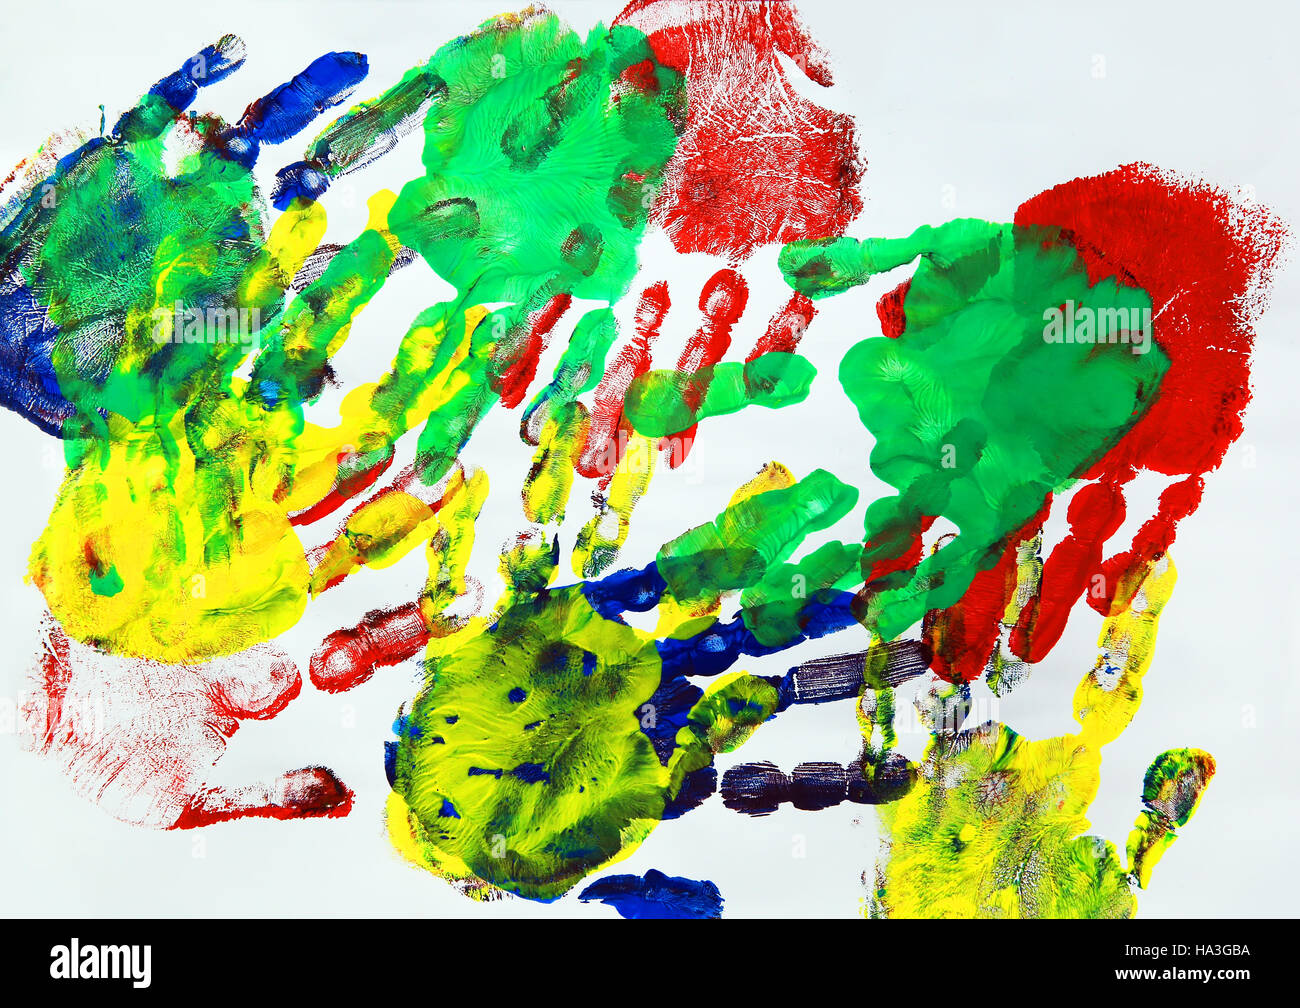 Painting with colorful kids hand prints Stock Photo